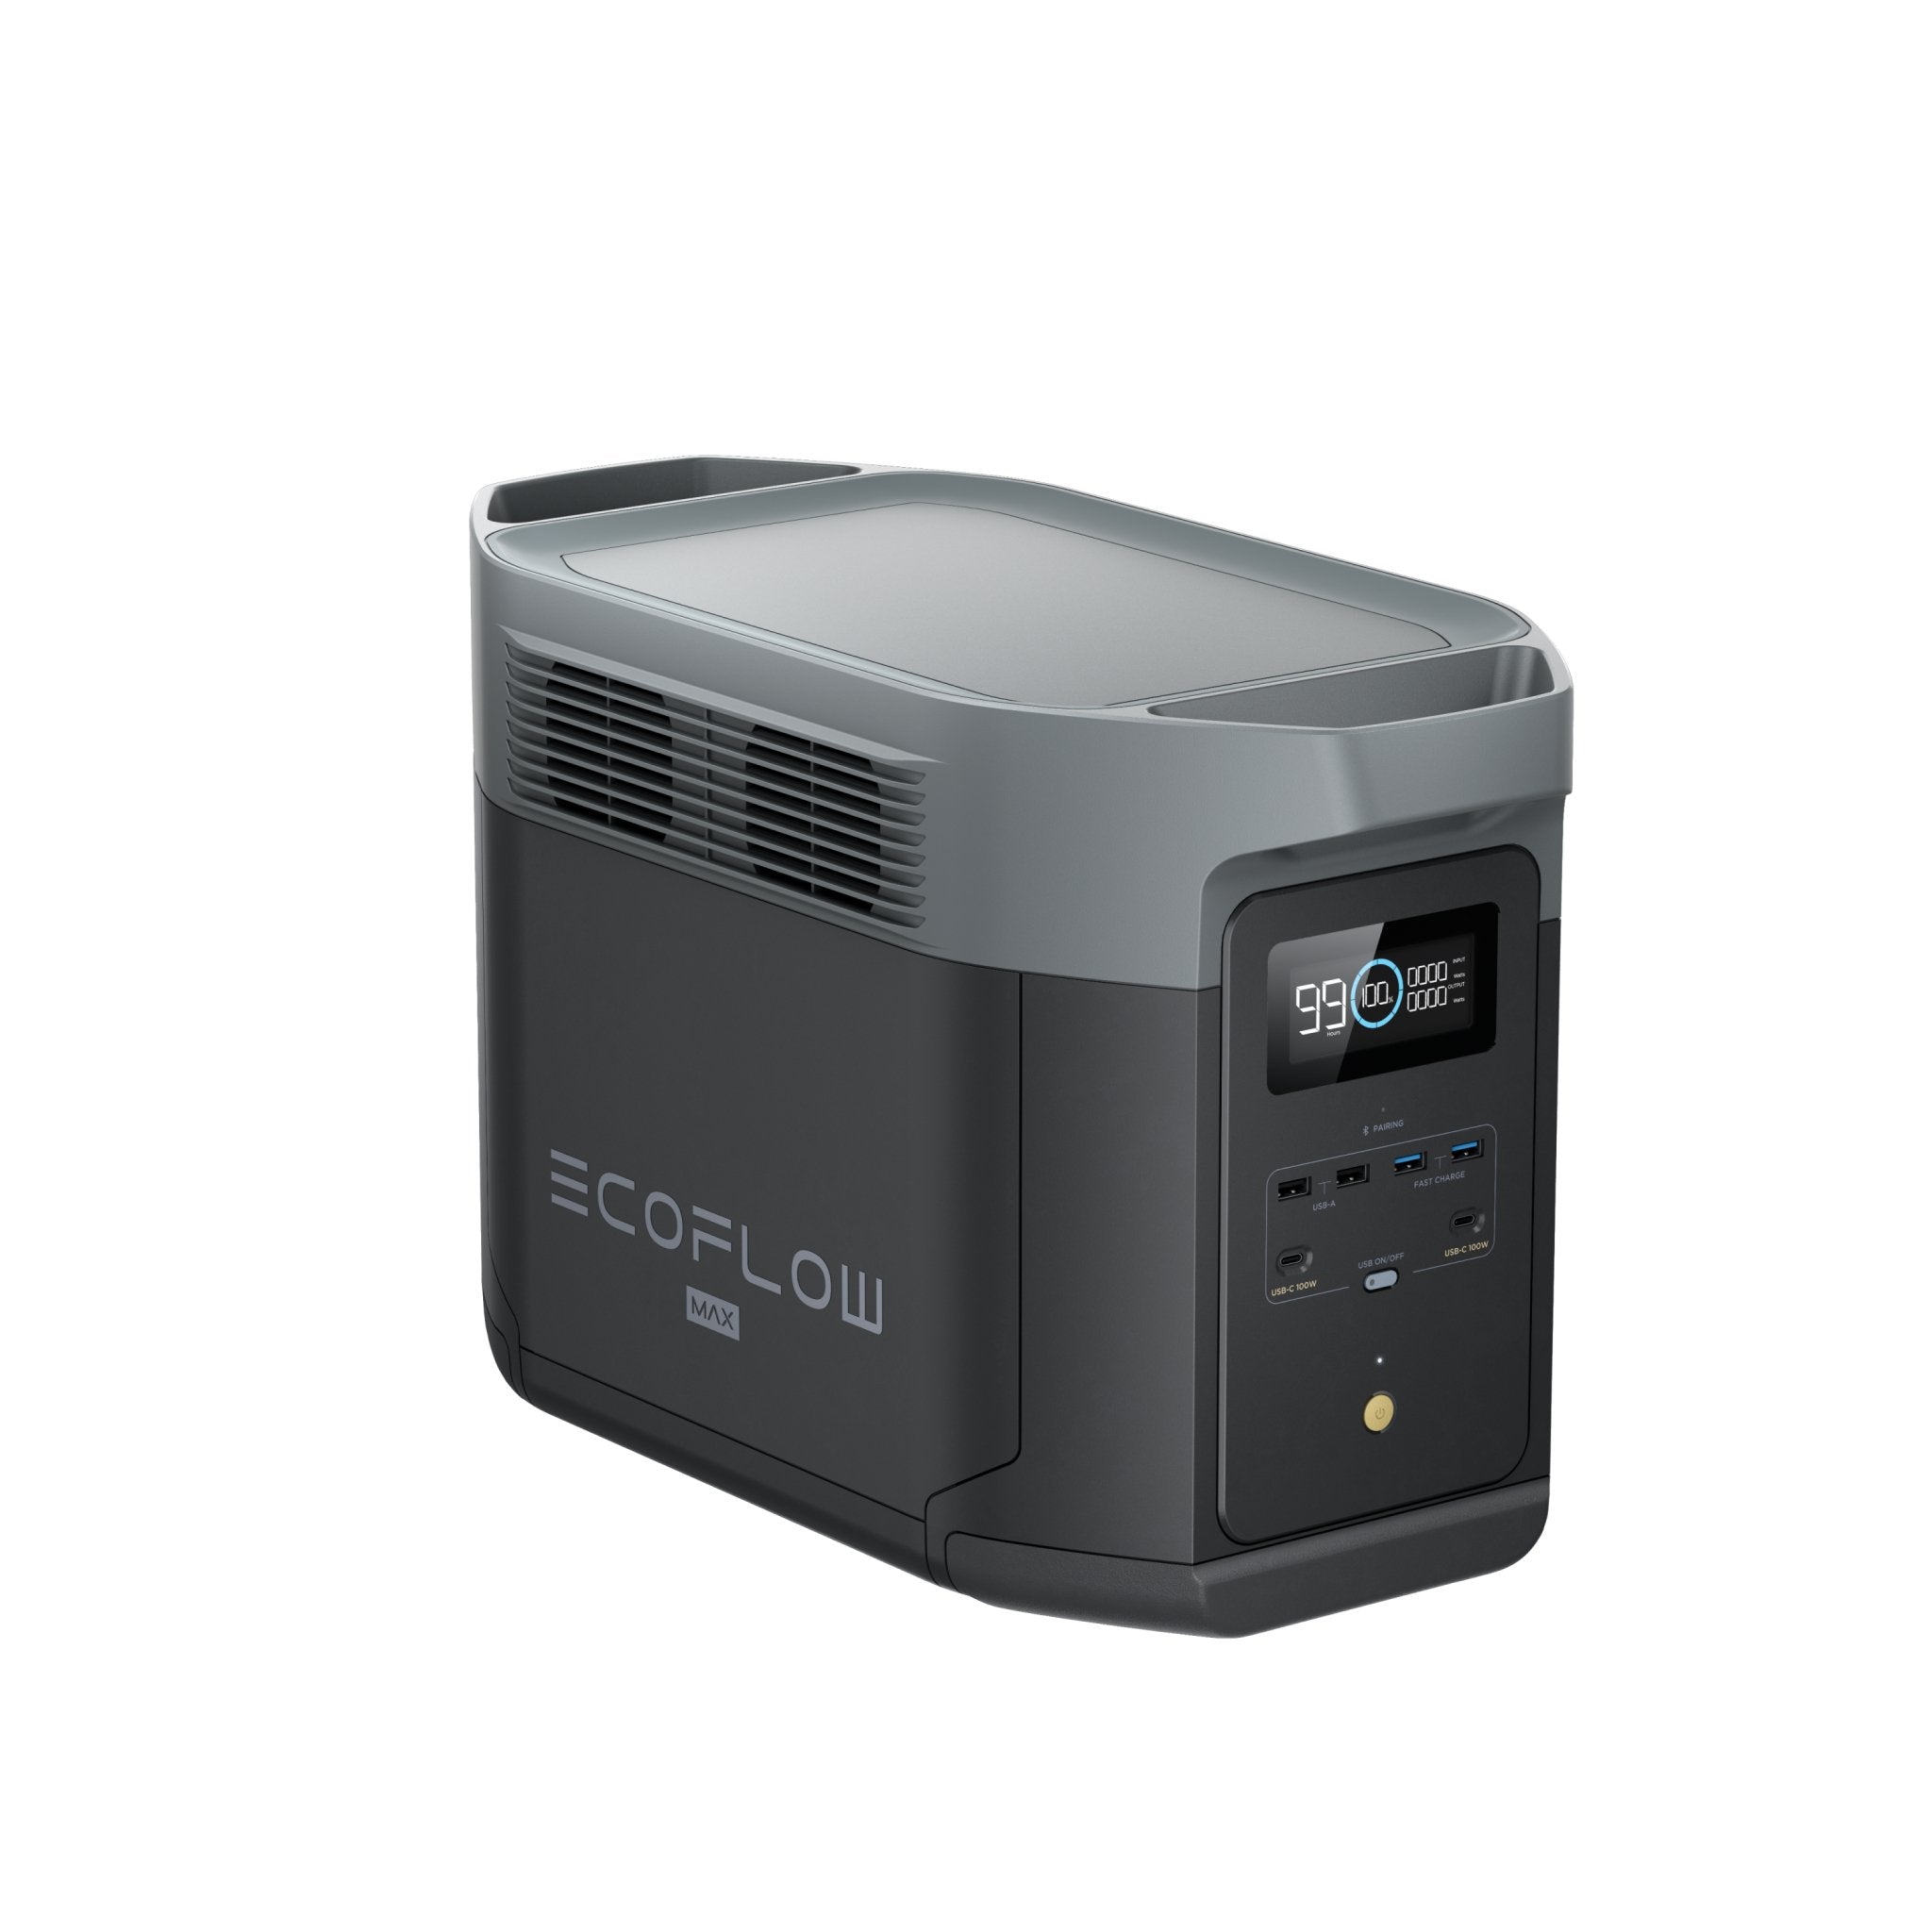 EcoFlow DELTA 2 Max Portable Power Station - Solar Generators and Power Stations Plus